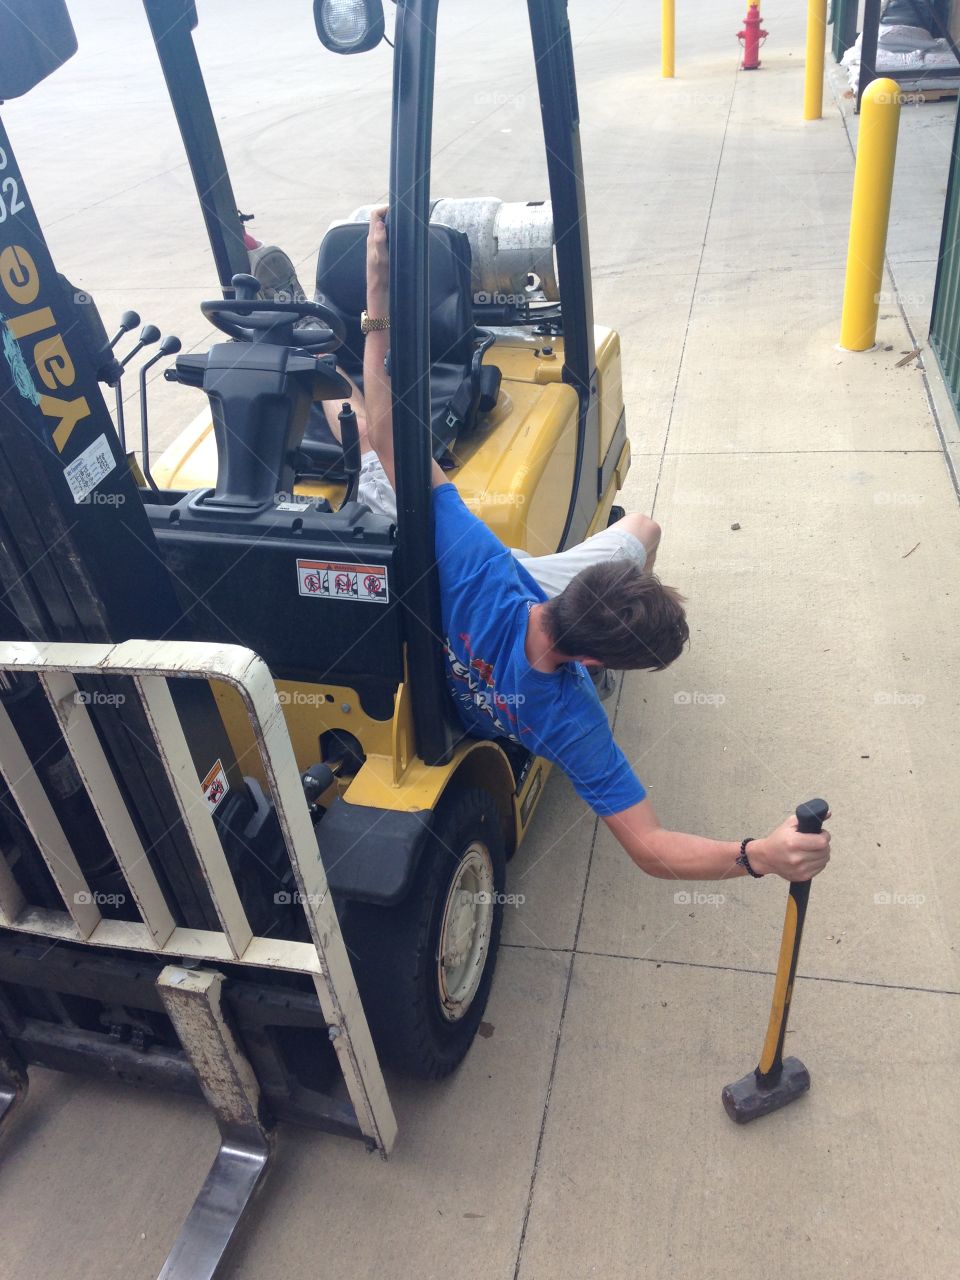 Said he forgot how to get off of the forklift HAHAHA